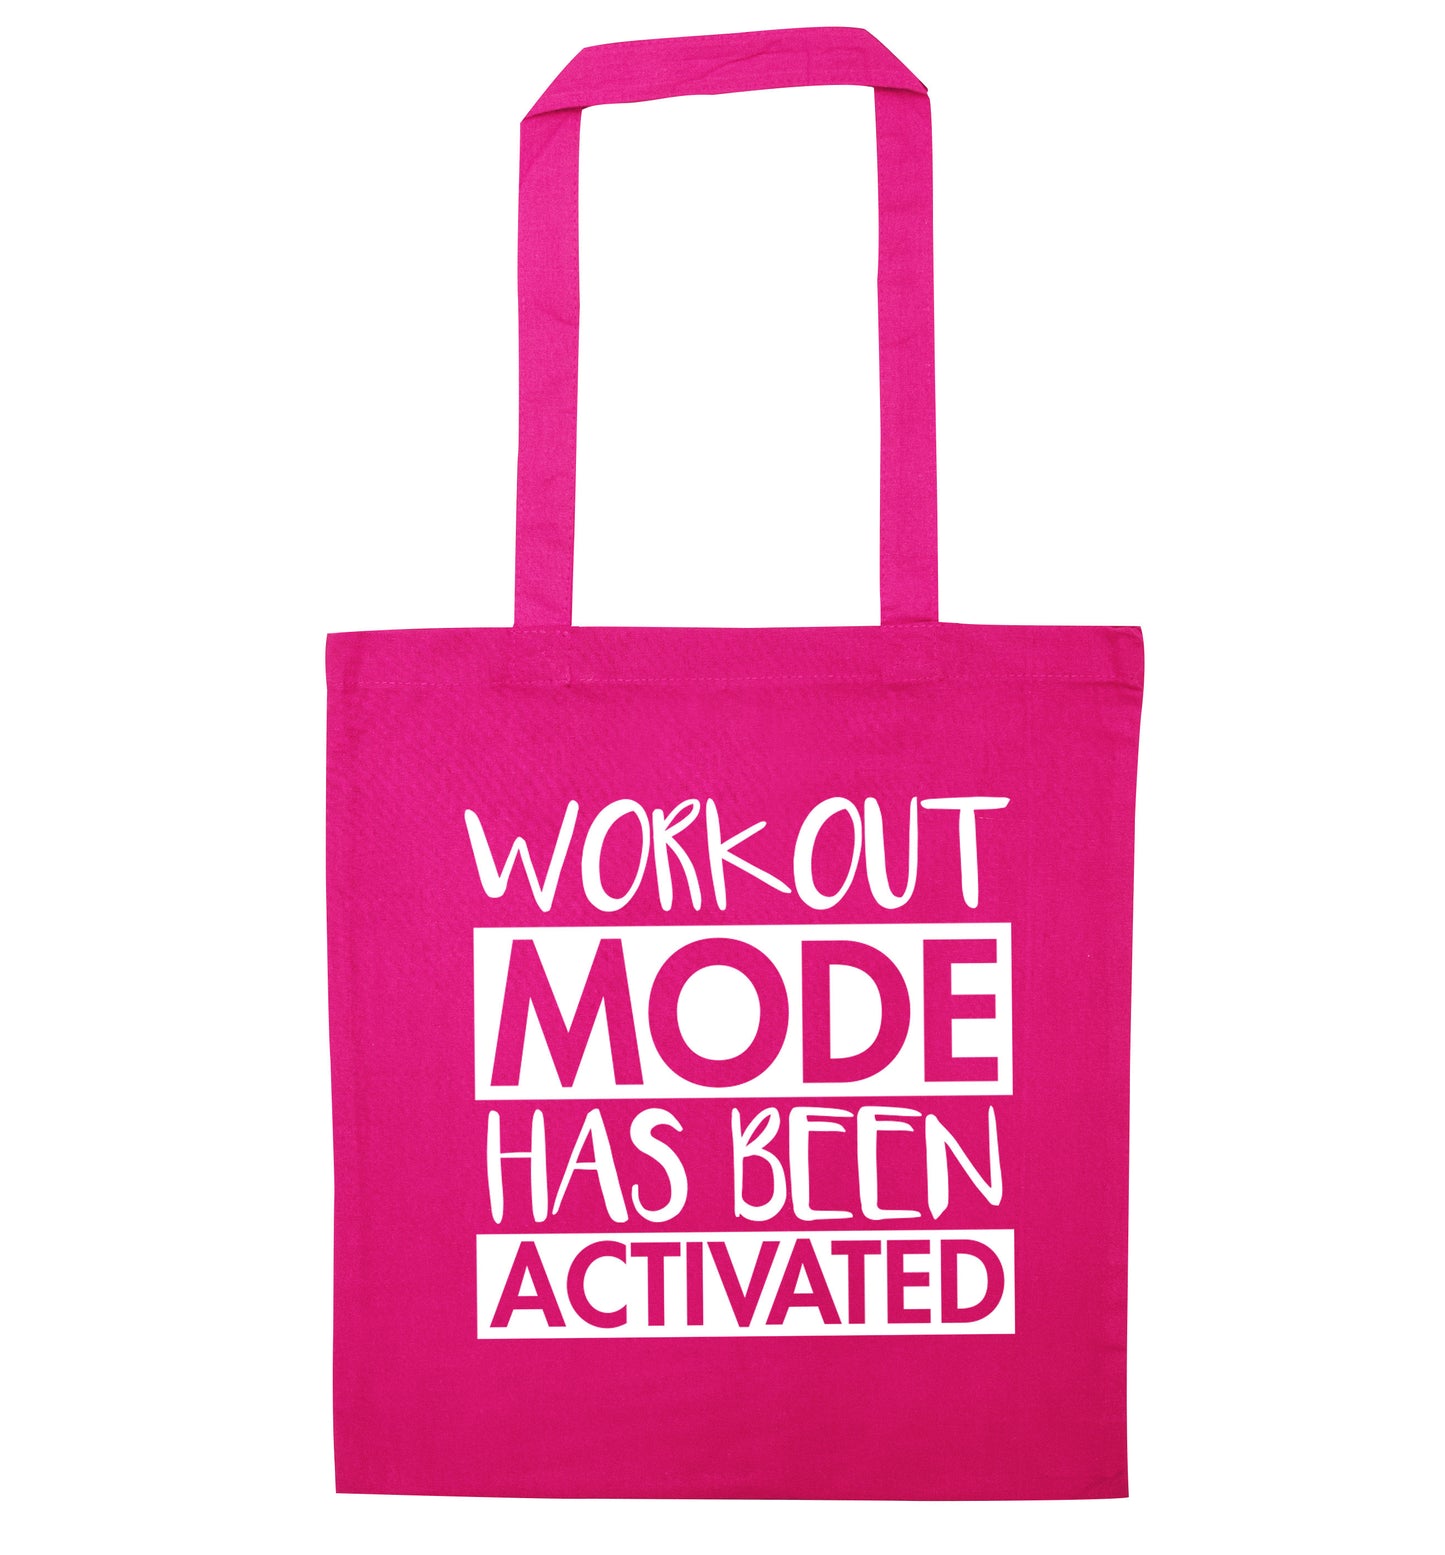 Workout mode has been activated pink tote bag